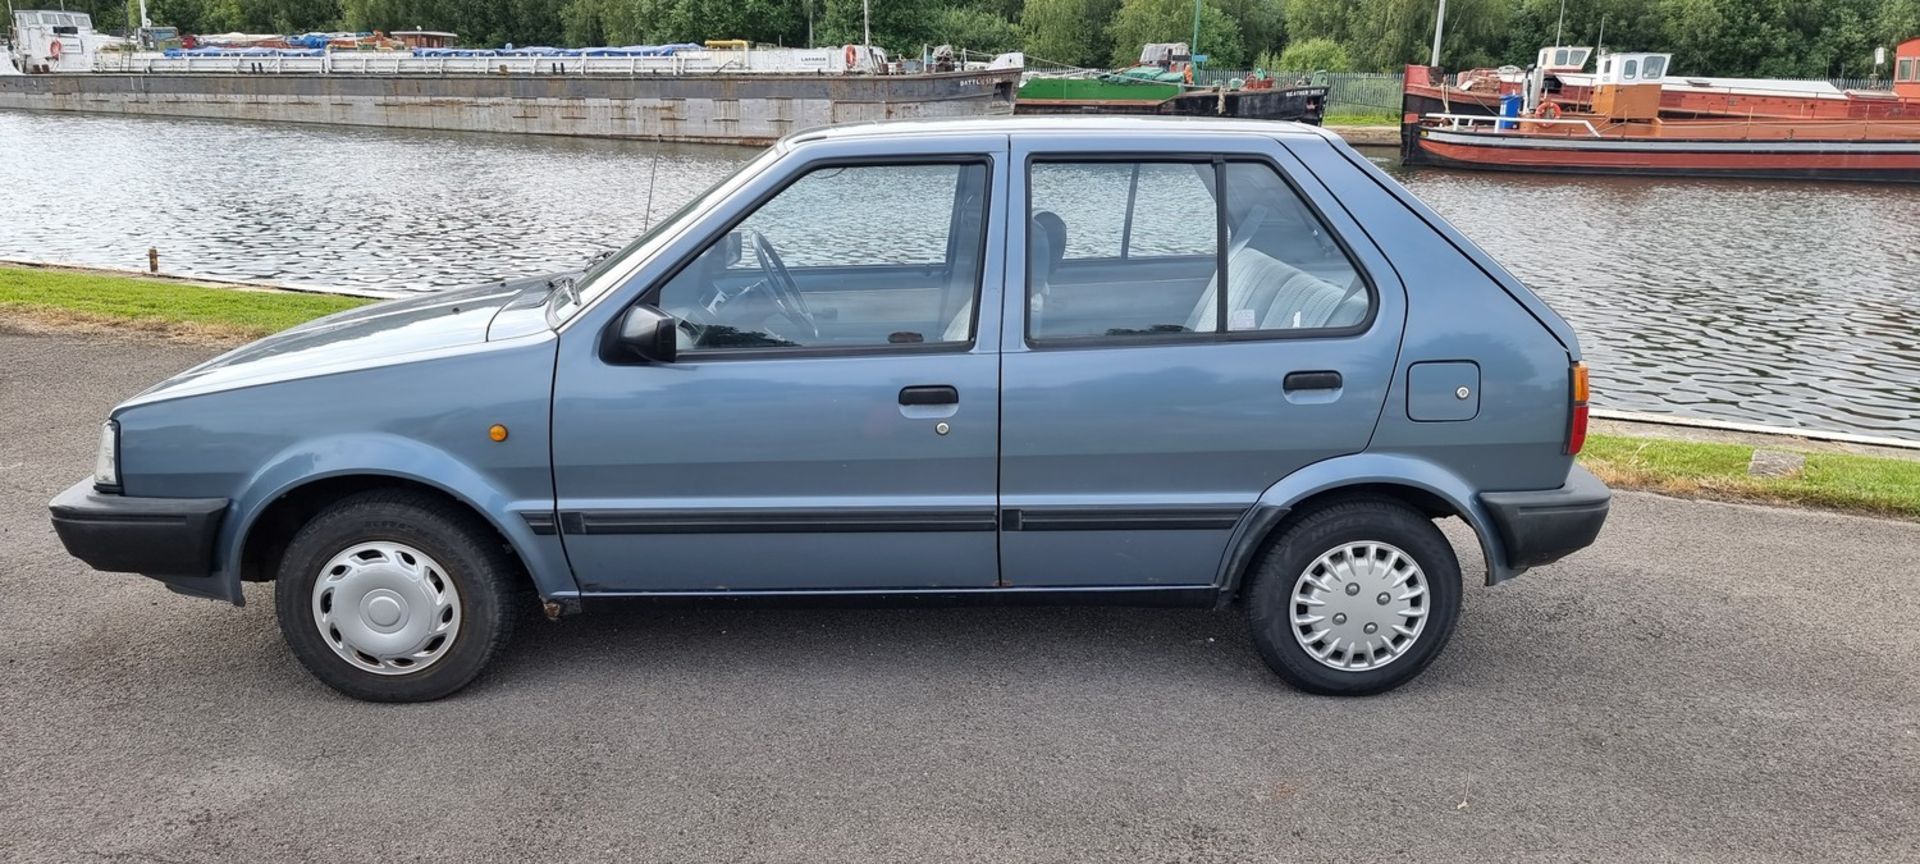 1987 Nissan Micra SGL automatic, 998cc. Registration number E549 BPU. Chassis number K10 429826. - Image 15 of 15